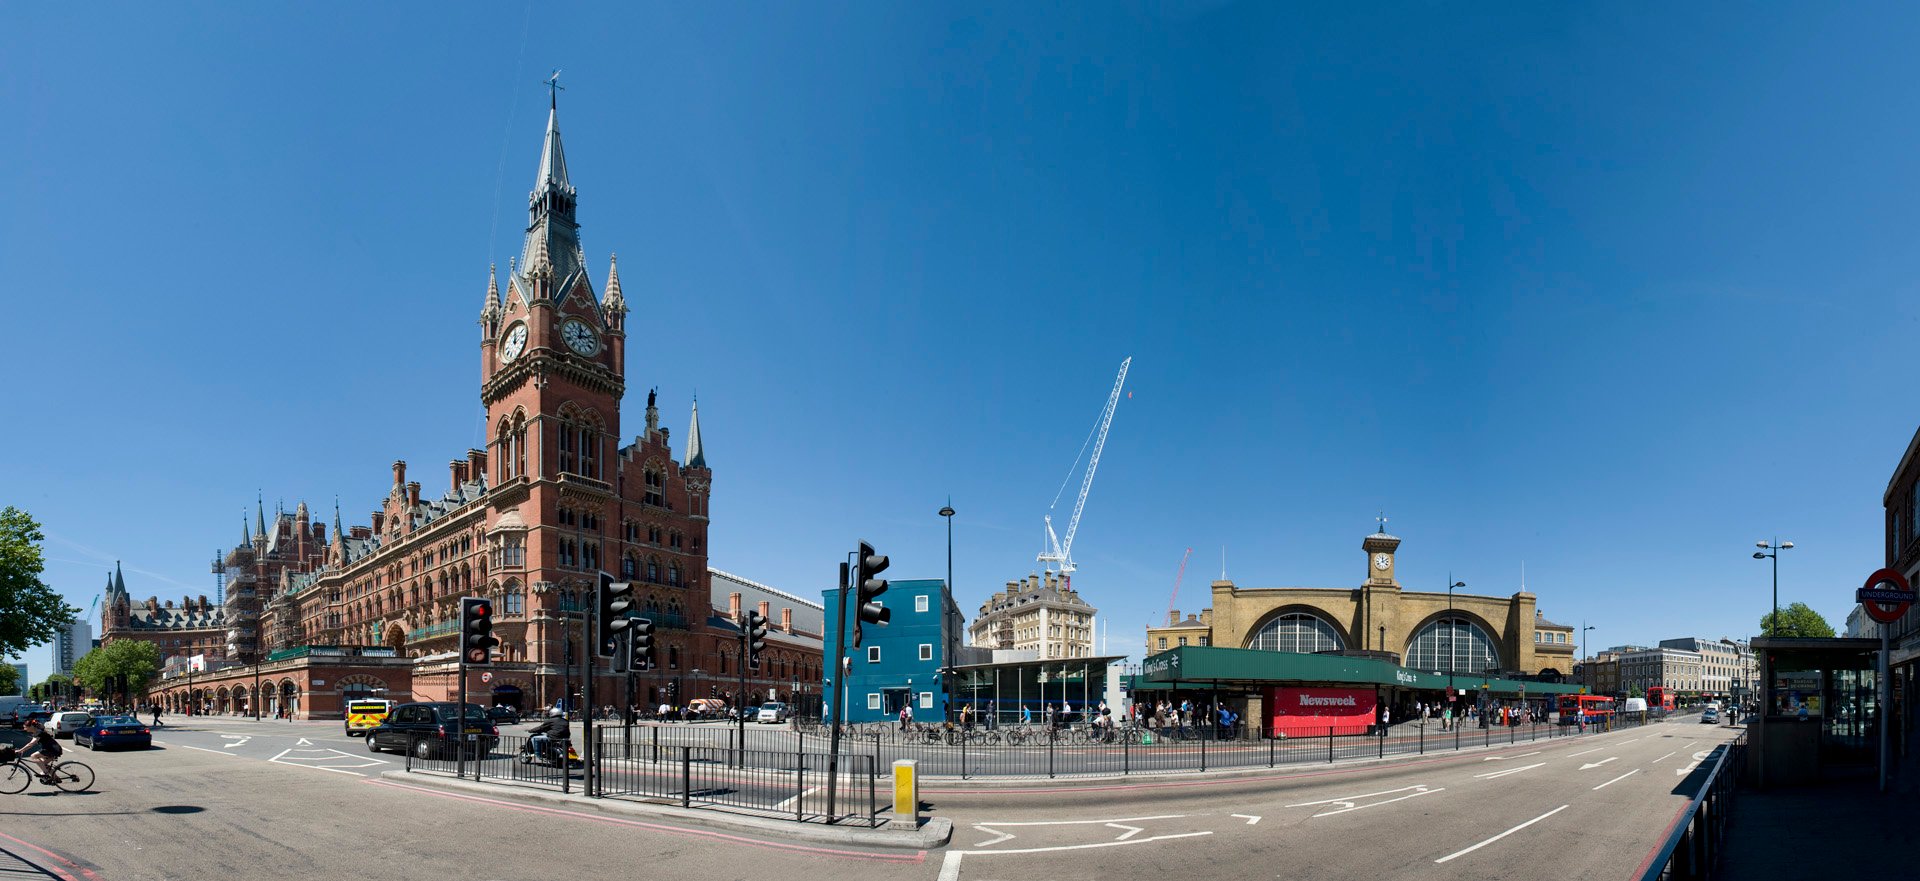 View of St Pancras International and King's Cross stations, London.